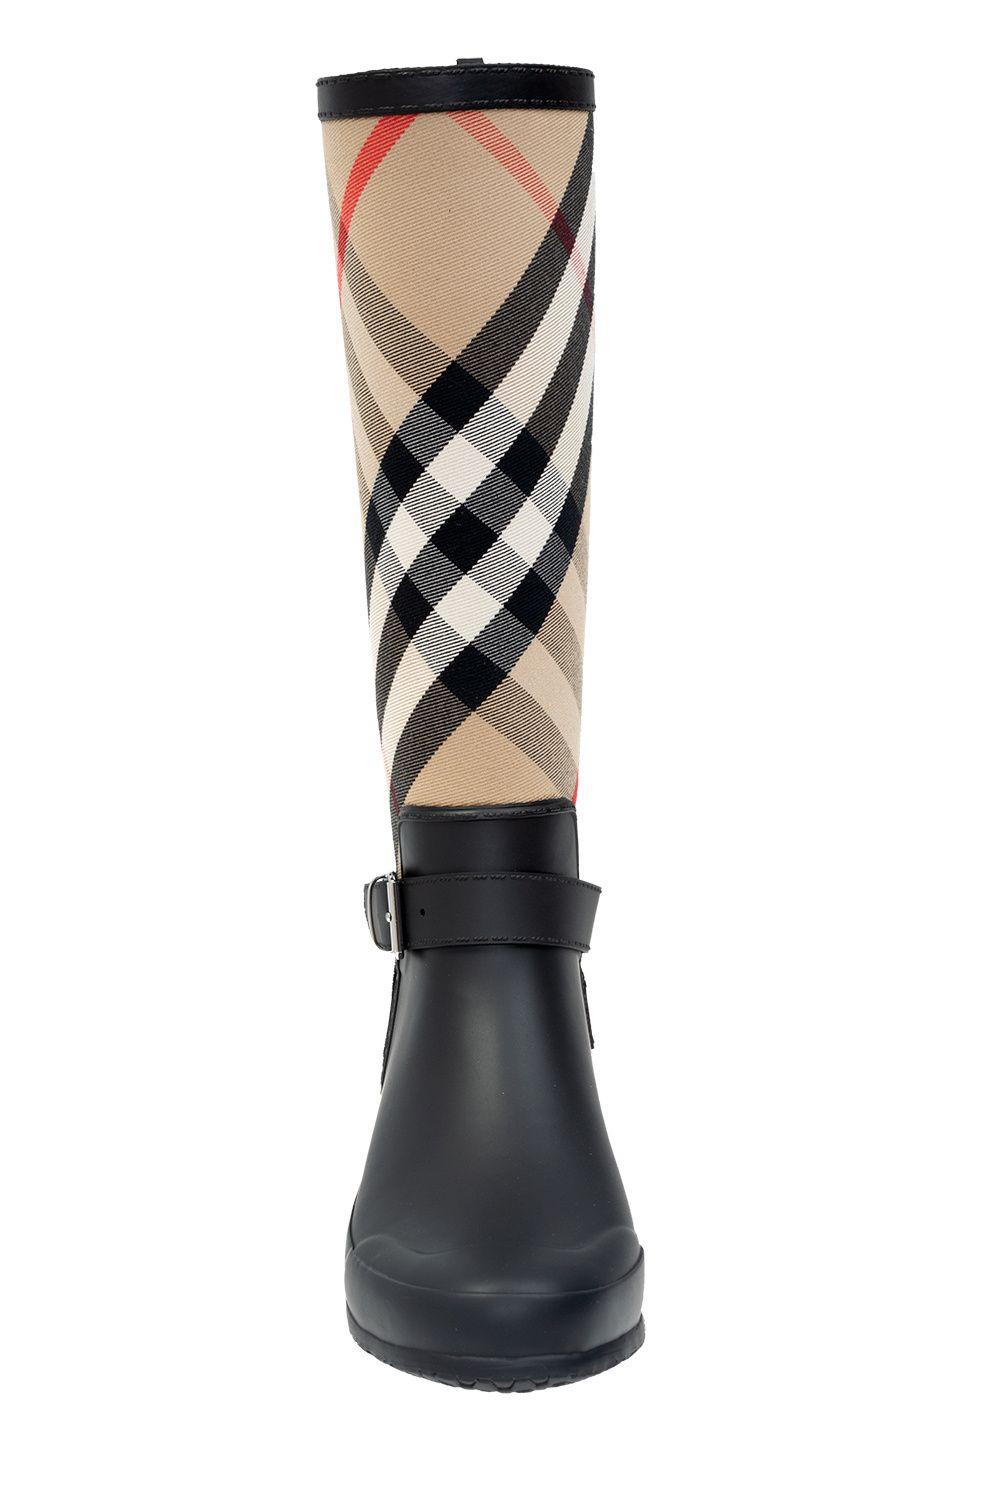 Burberry 'house Check' Rain Boots in Natural | Lyst